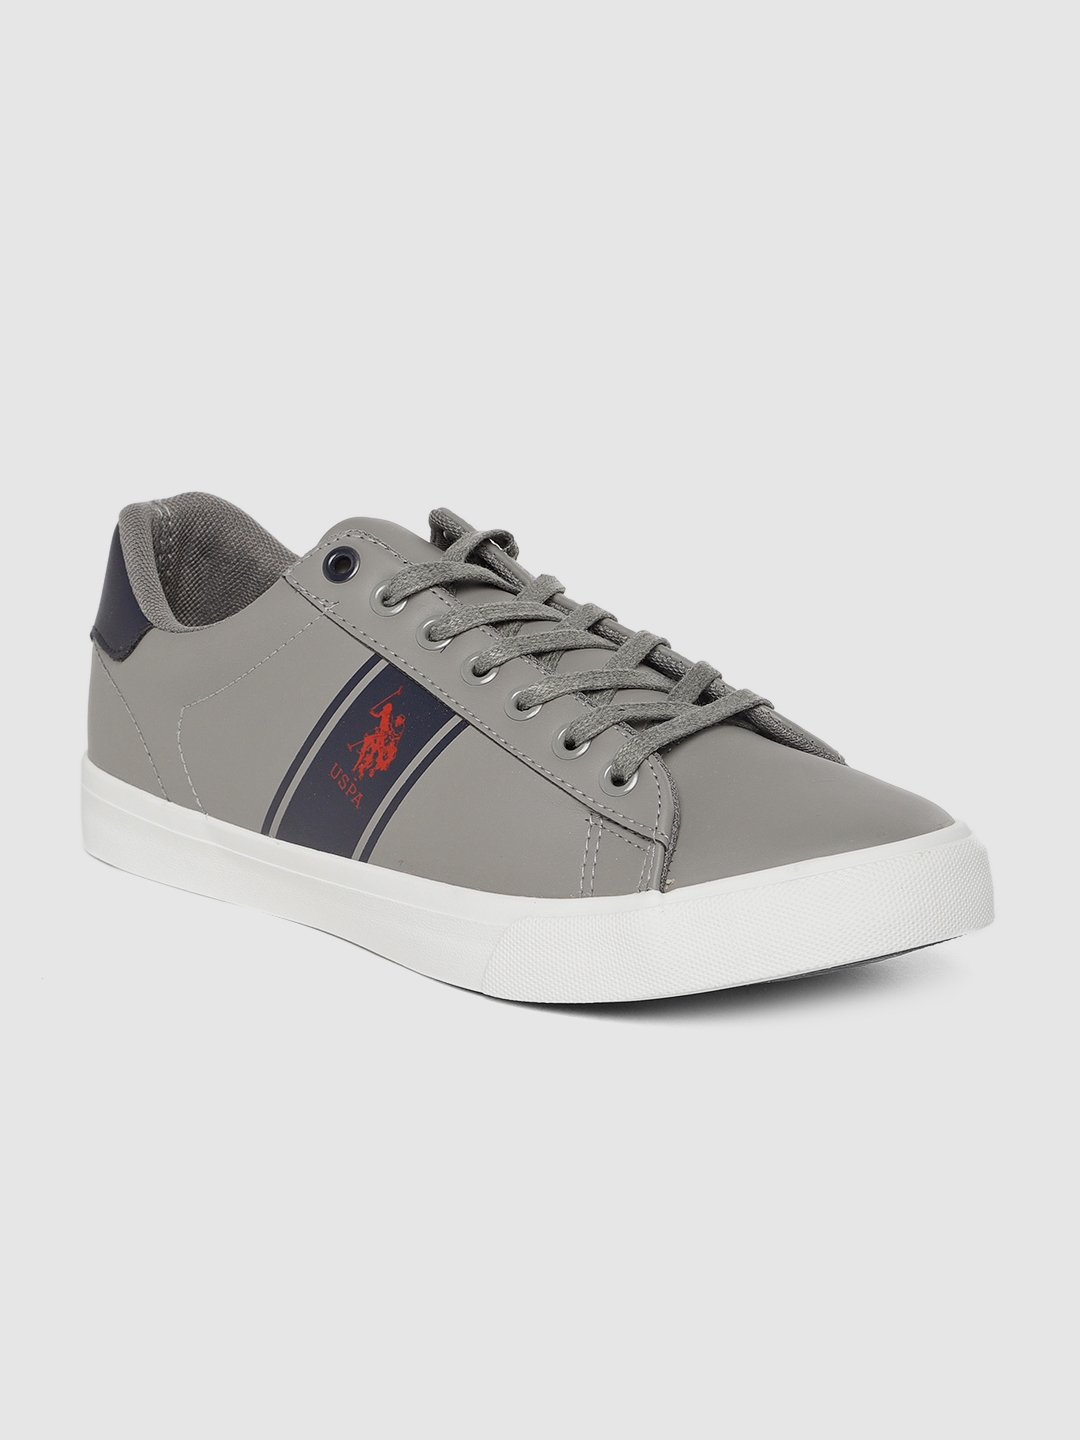 Buy U.S. Polo Assn. Men Grey Solid Sneakers - Casual Shoes for Men ...